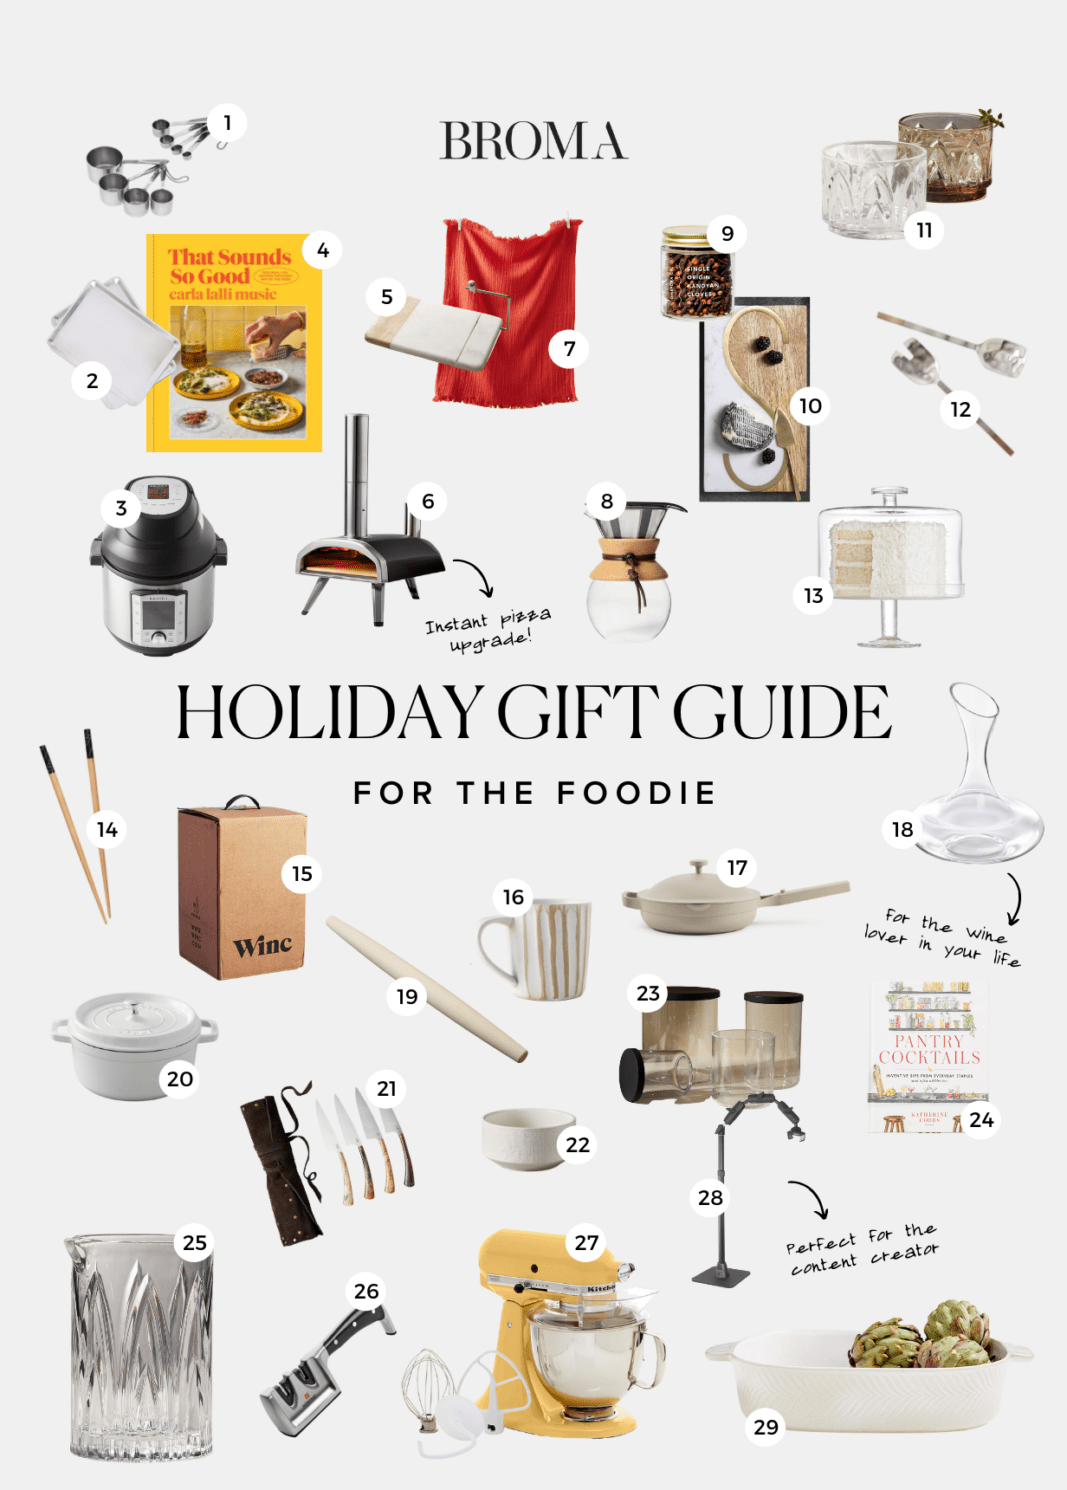 Holiday Gift Guide For Foodies - Primavera Kitchen